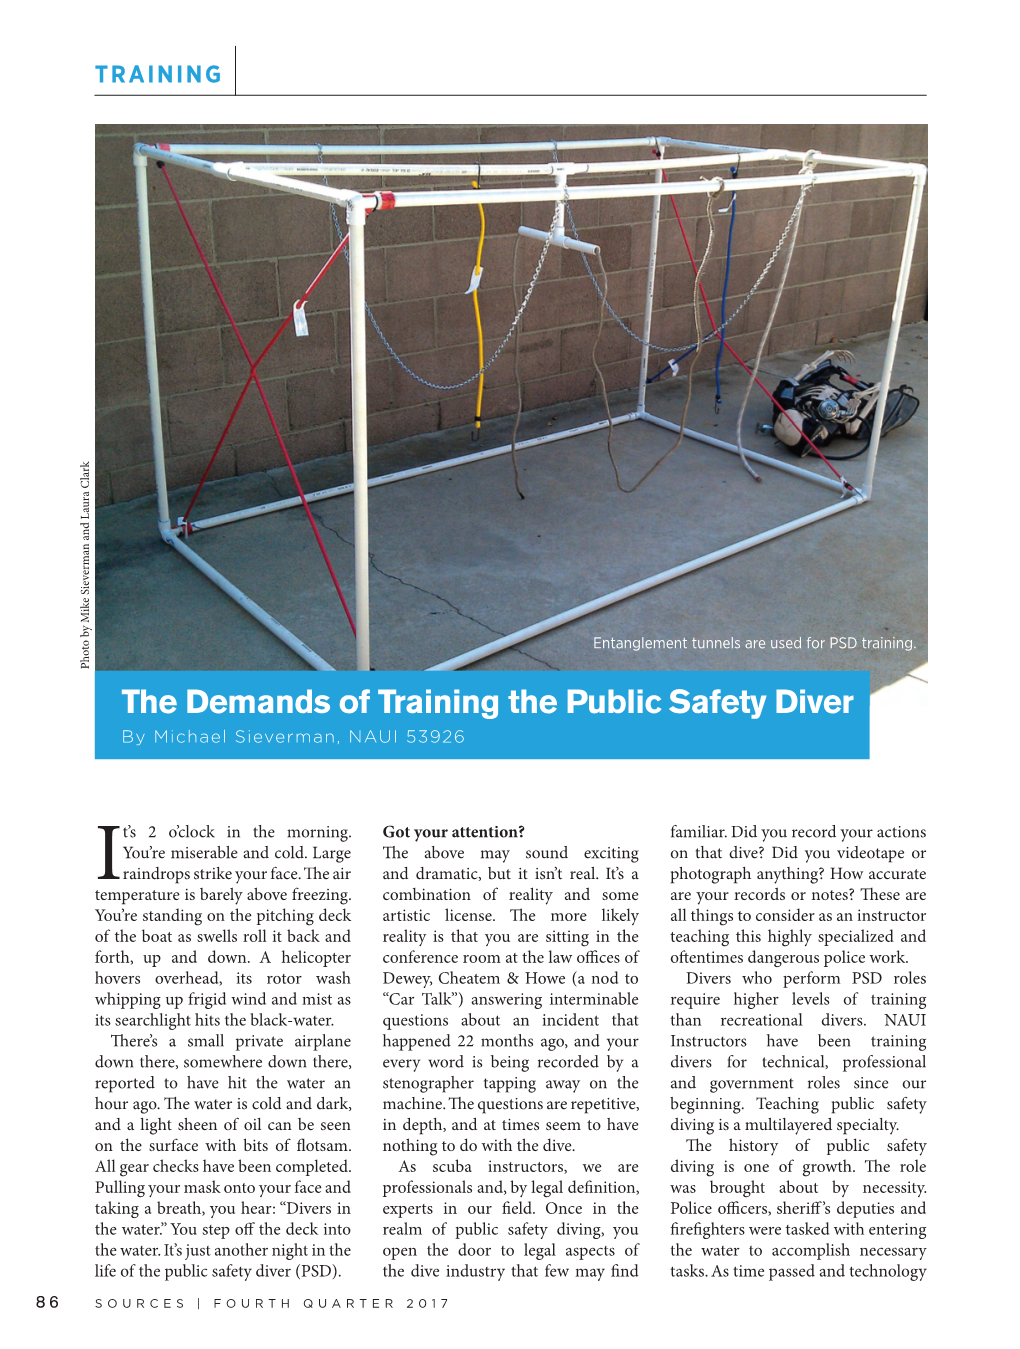 The Demands of Training the Public Safety Diver by Michael Sieverman, NAUI 53926